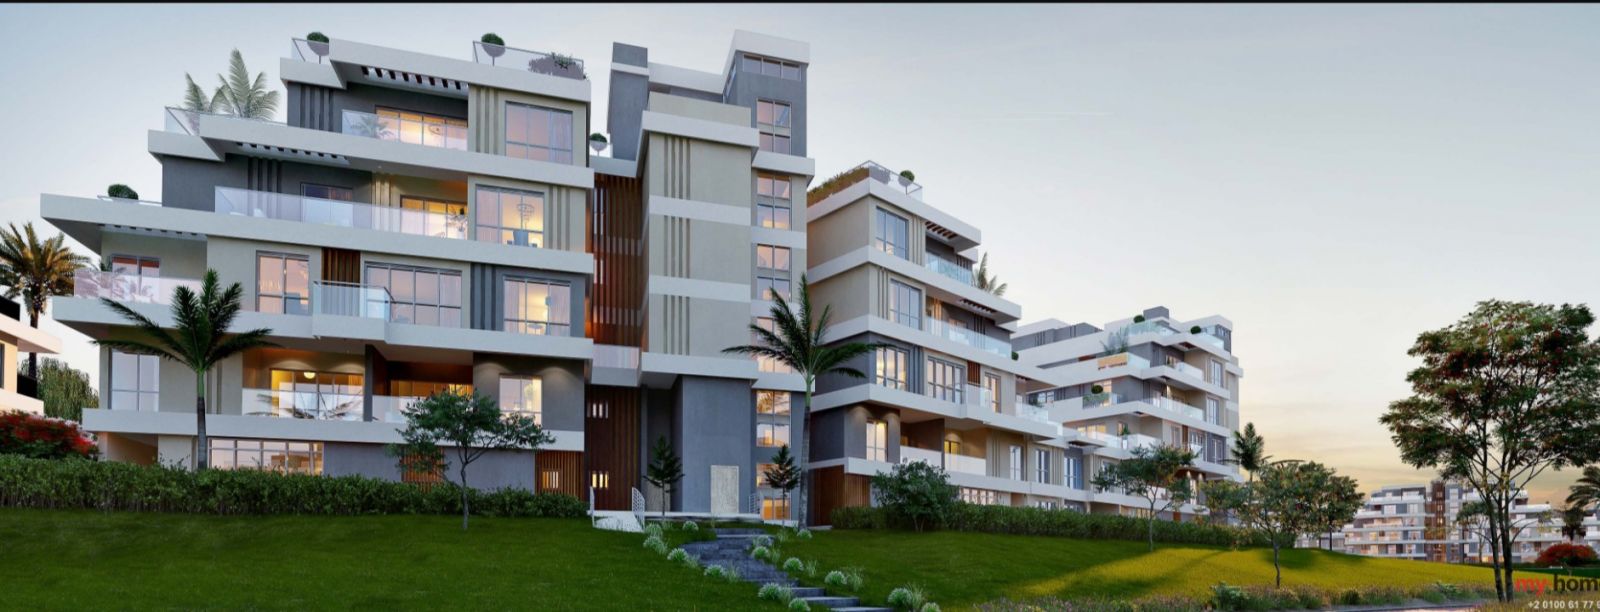 Apartments for sale in Villette Sodic 4 bedrooms 216m²